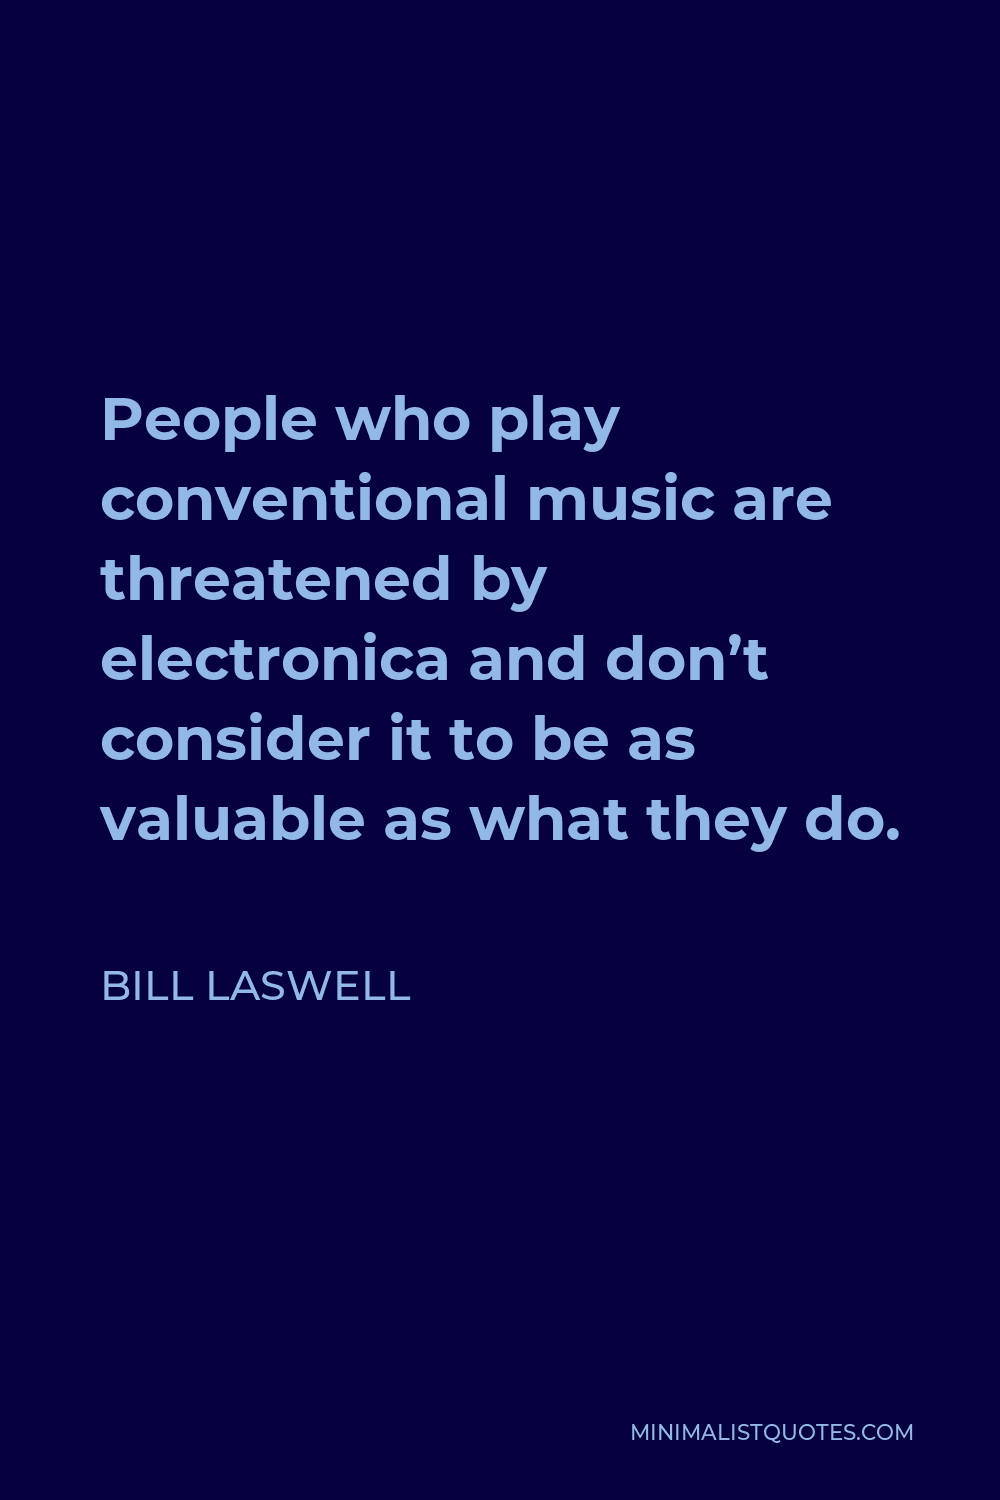 Bill Laswell Quote - People who play conventional music are threatened by electronica and don’t consider it to be as valuable as what they do.